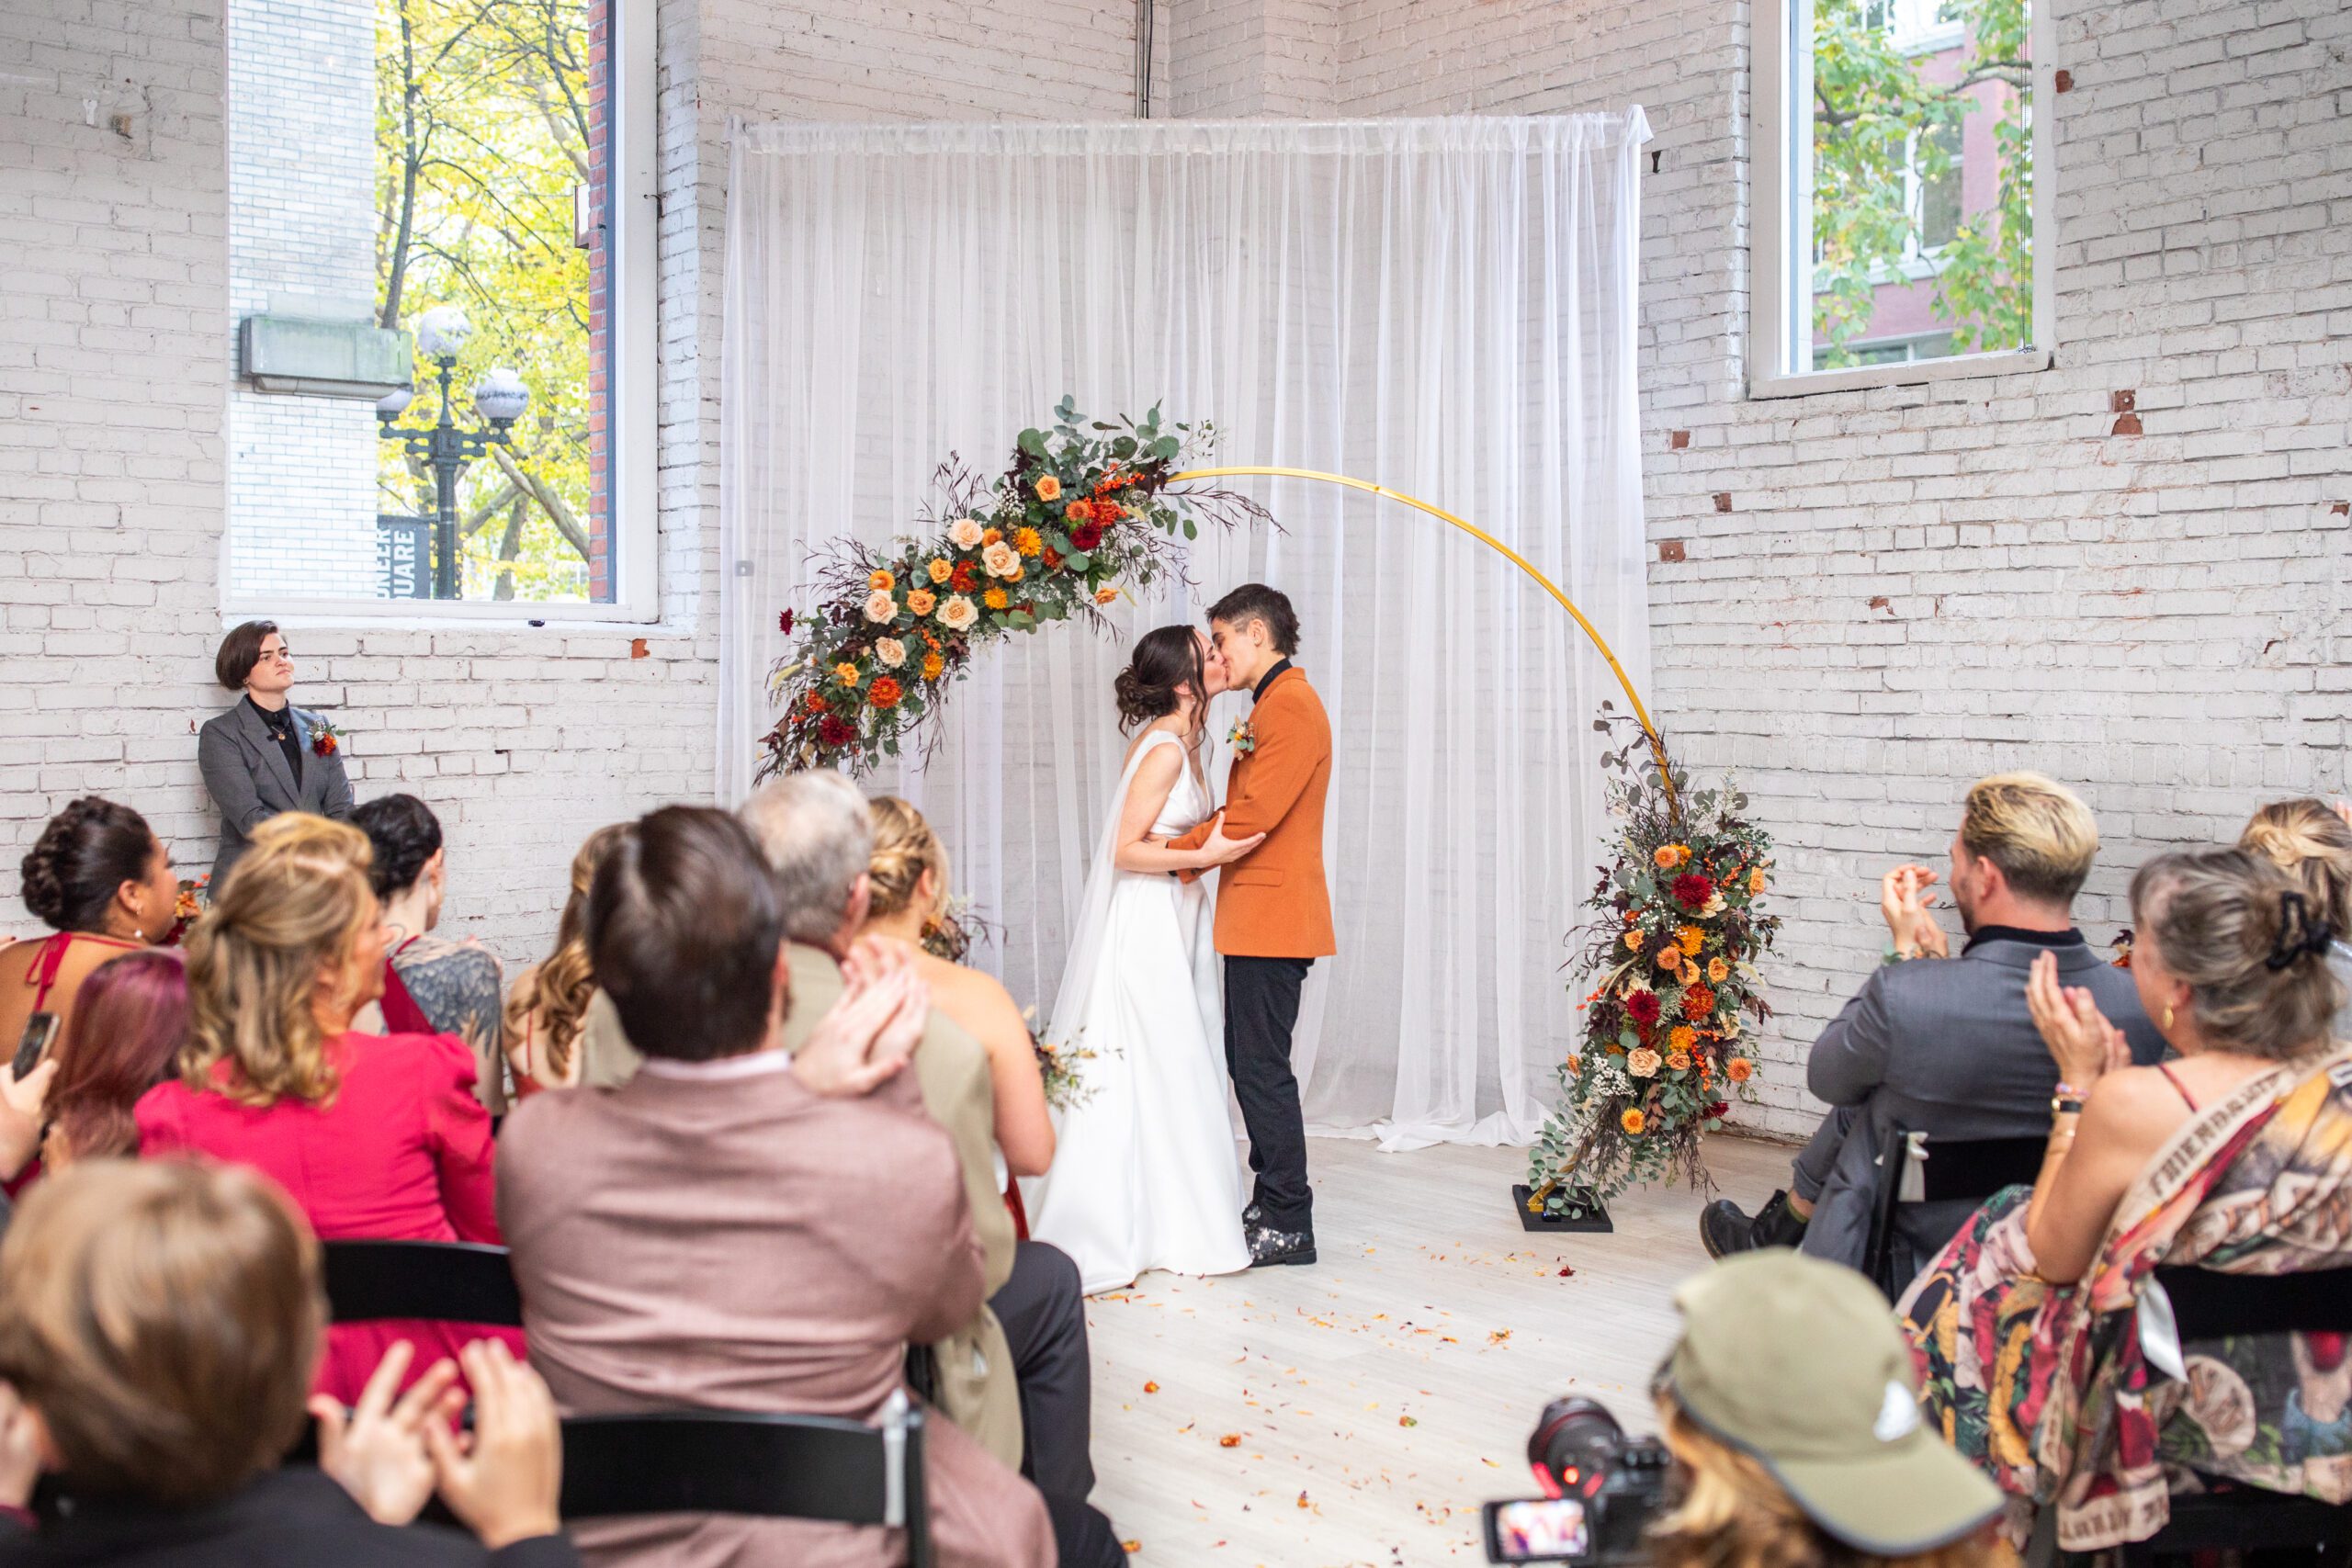 LGBTQ wedding at the 101, brides kissing during their wedding ceremony.